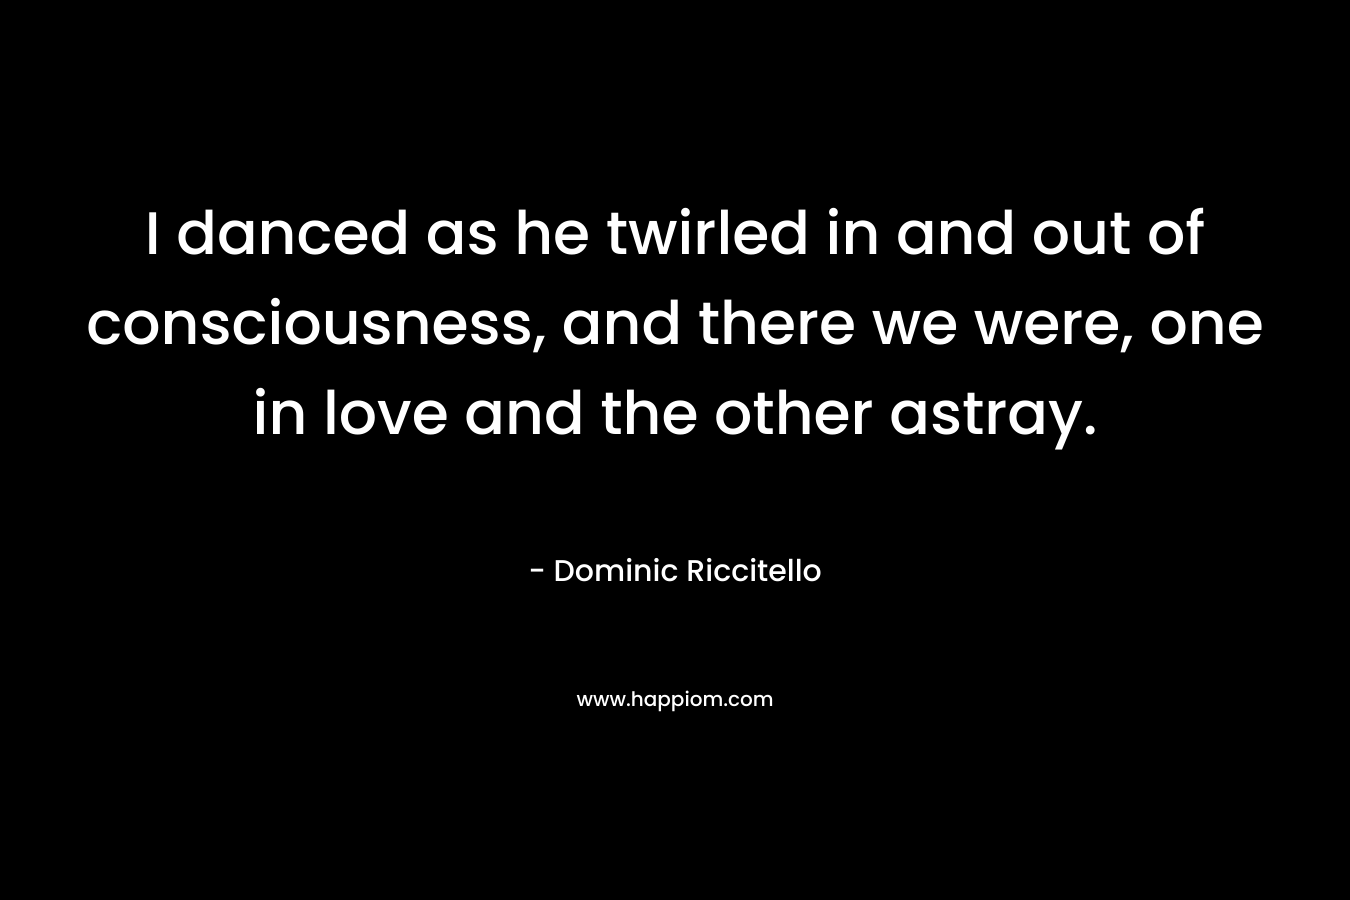 I danced as he twirled in and out of consciousness, and there we were, one in love and the other astray.